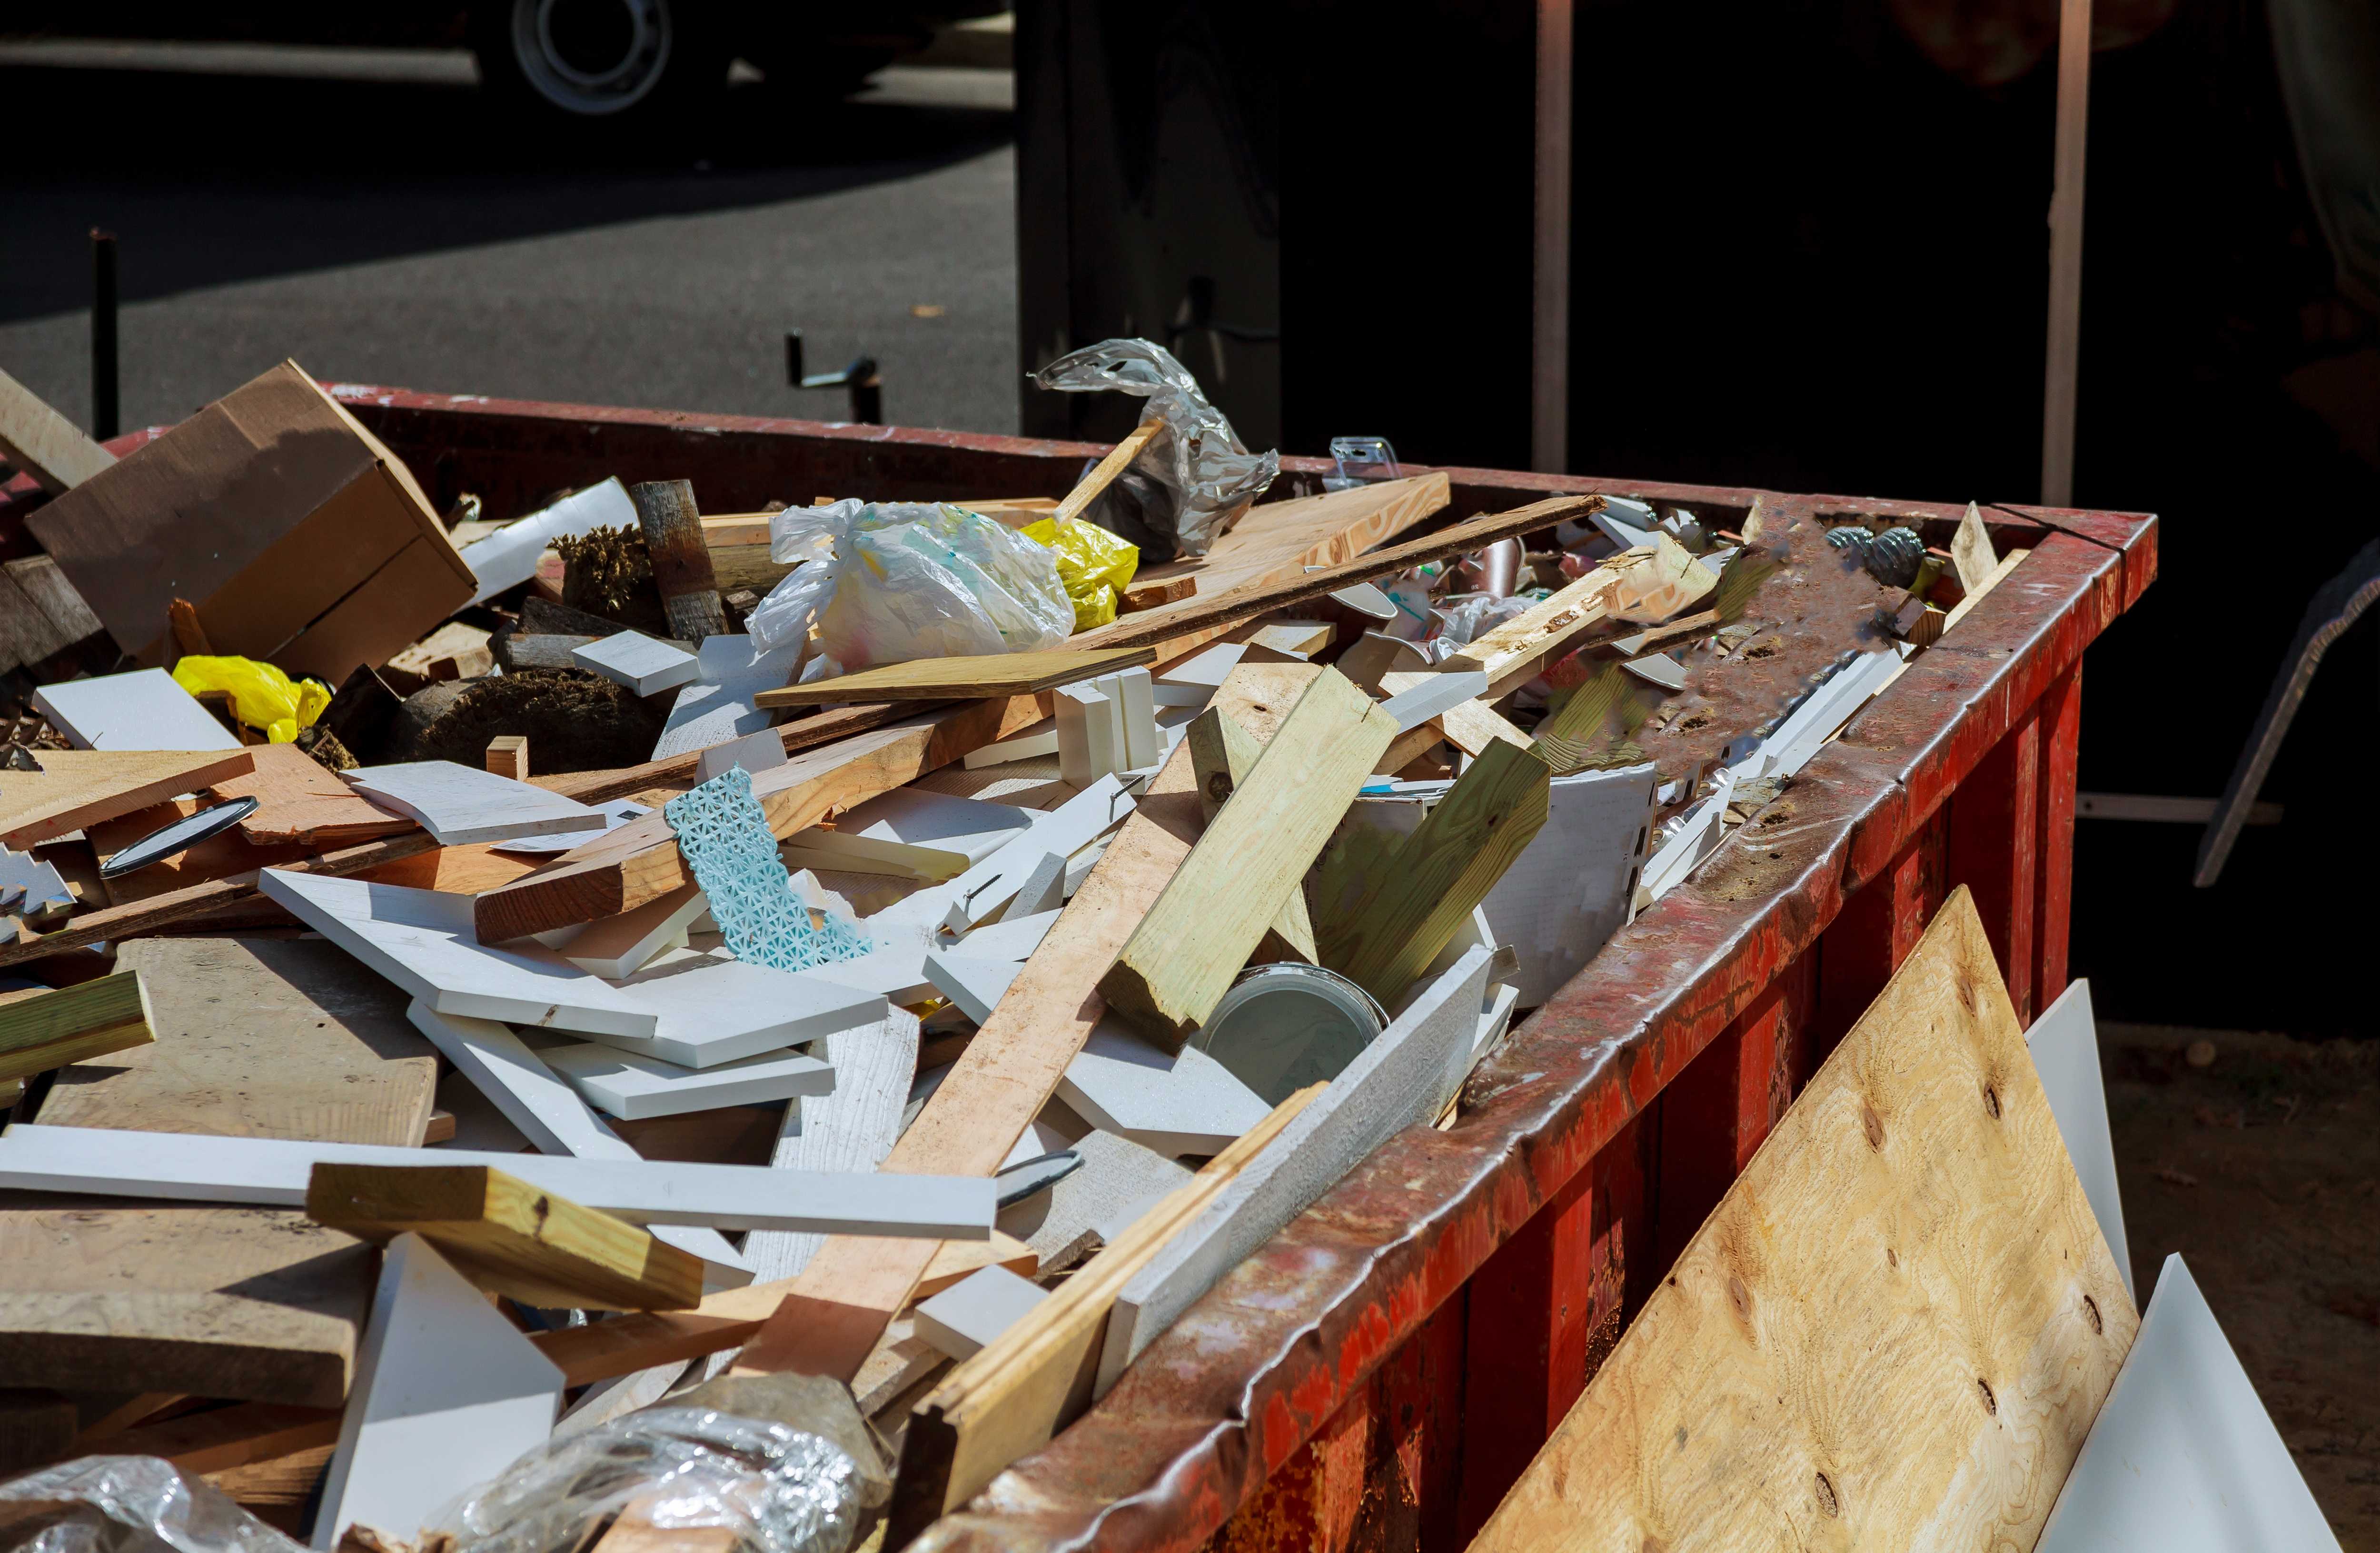 Local Skip Hire Services in Shacklewell